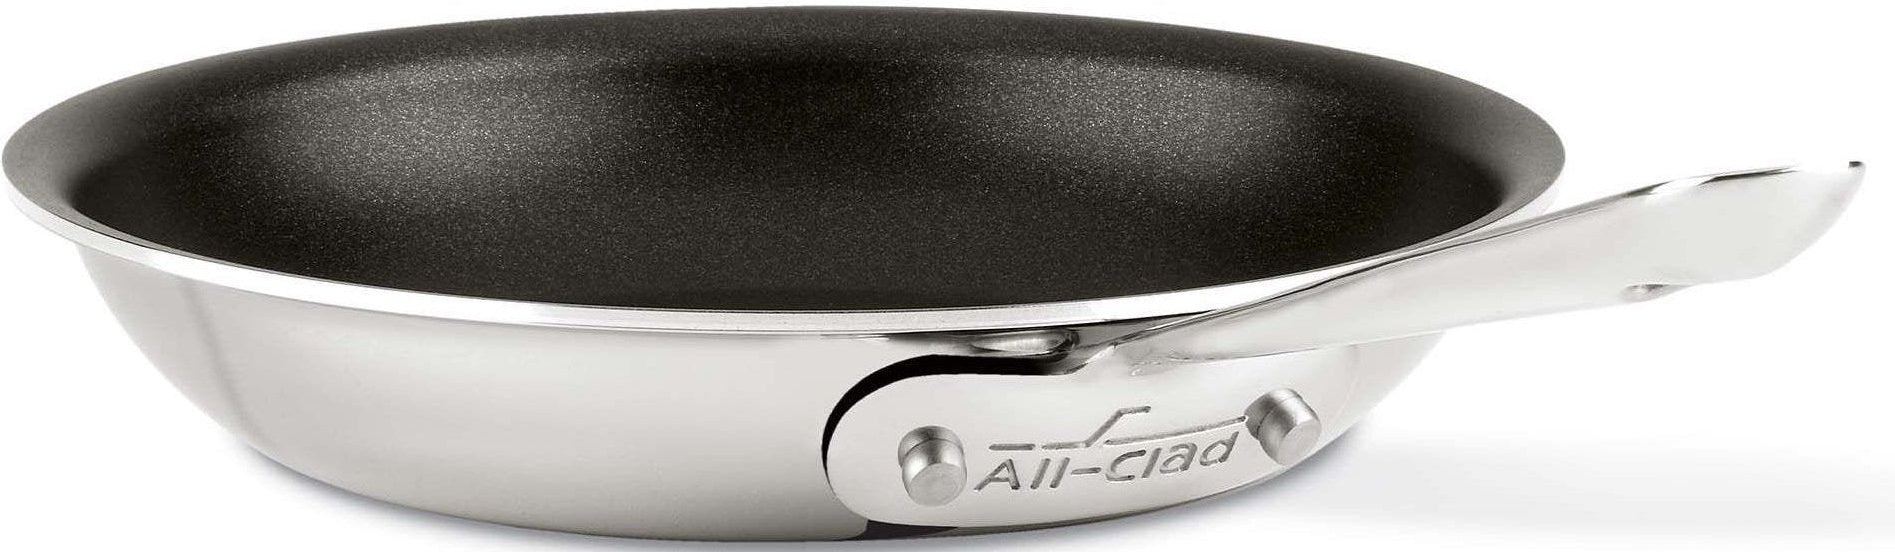 All-Clad - D3 Stainless 8" Non-Stick Fry Pan - 4108NSR2